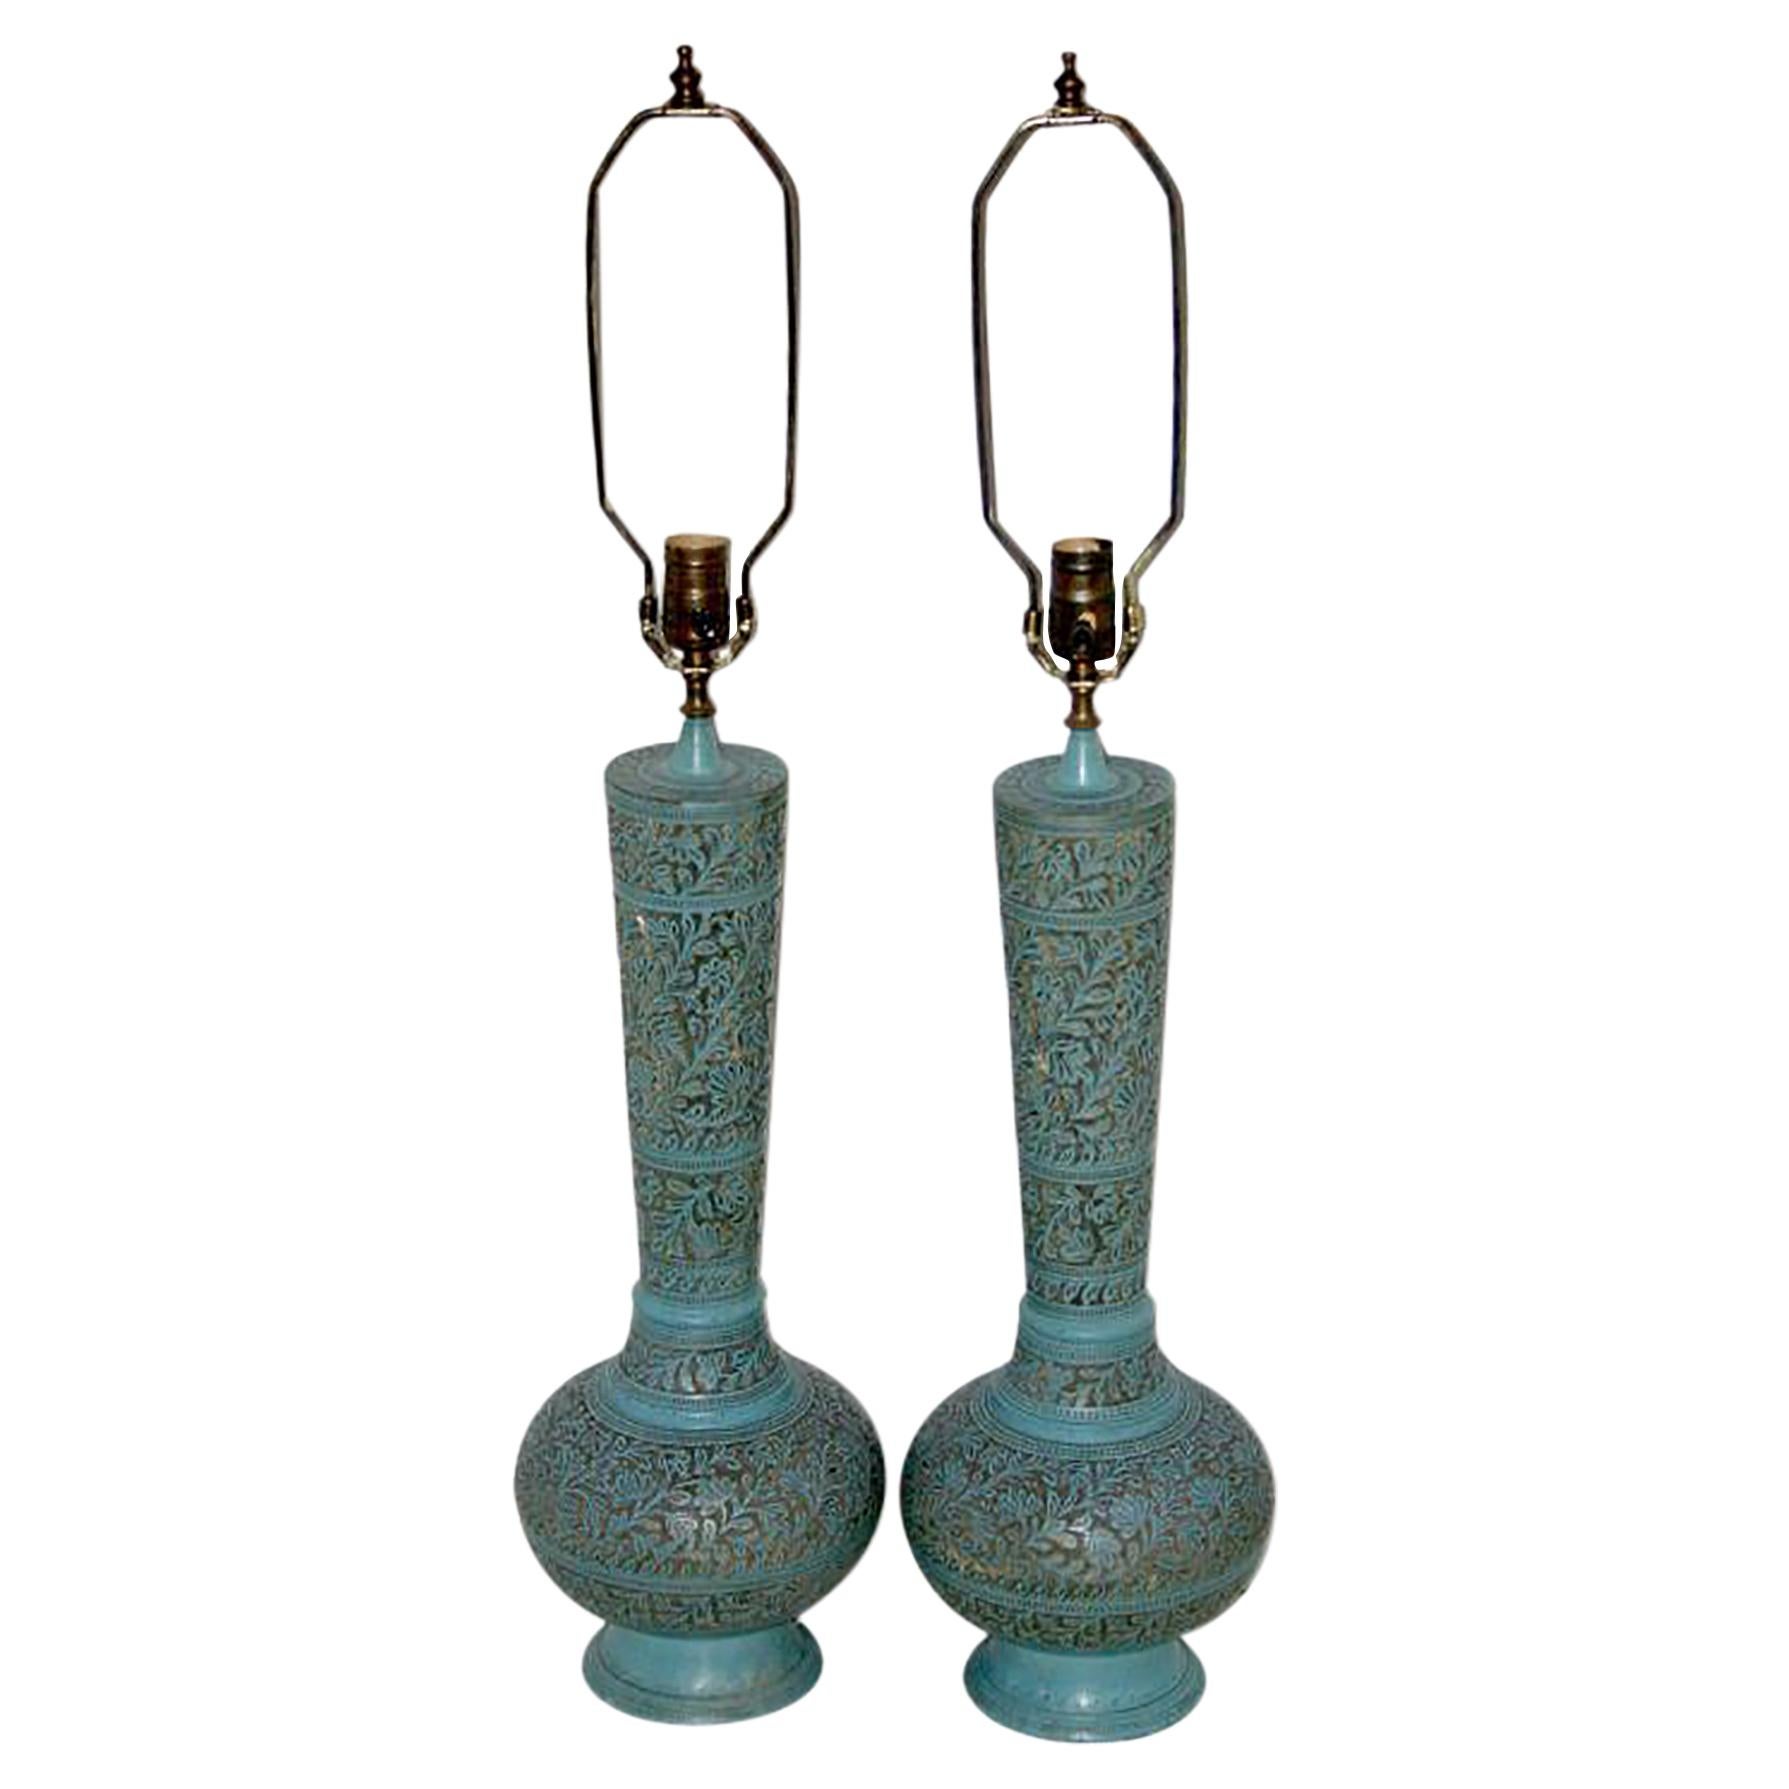 Pair of Etched Brass Turquoise Lamps